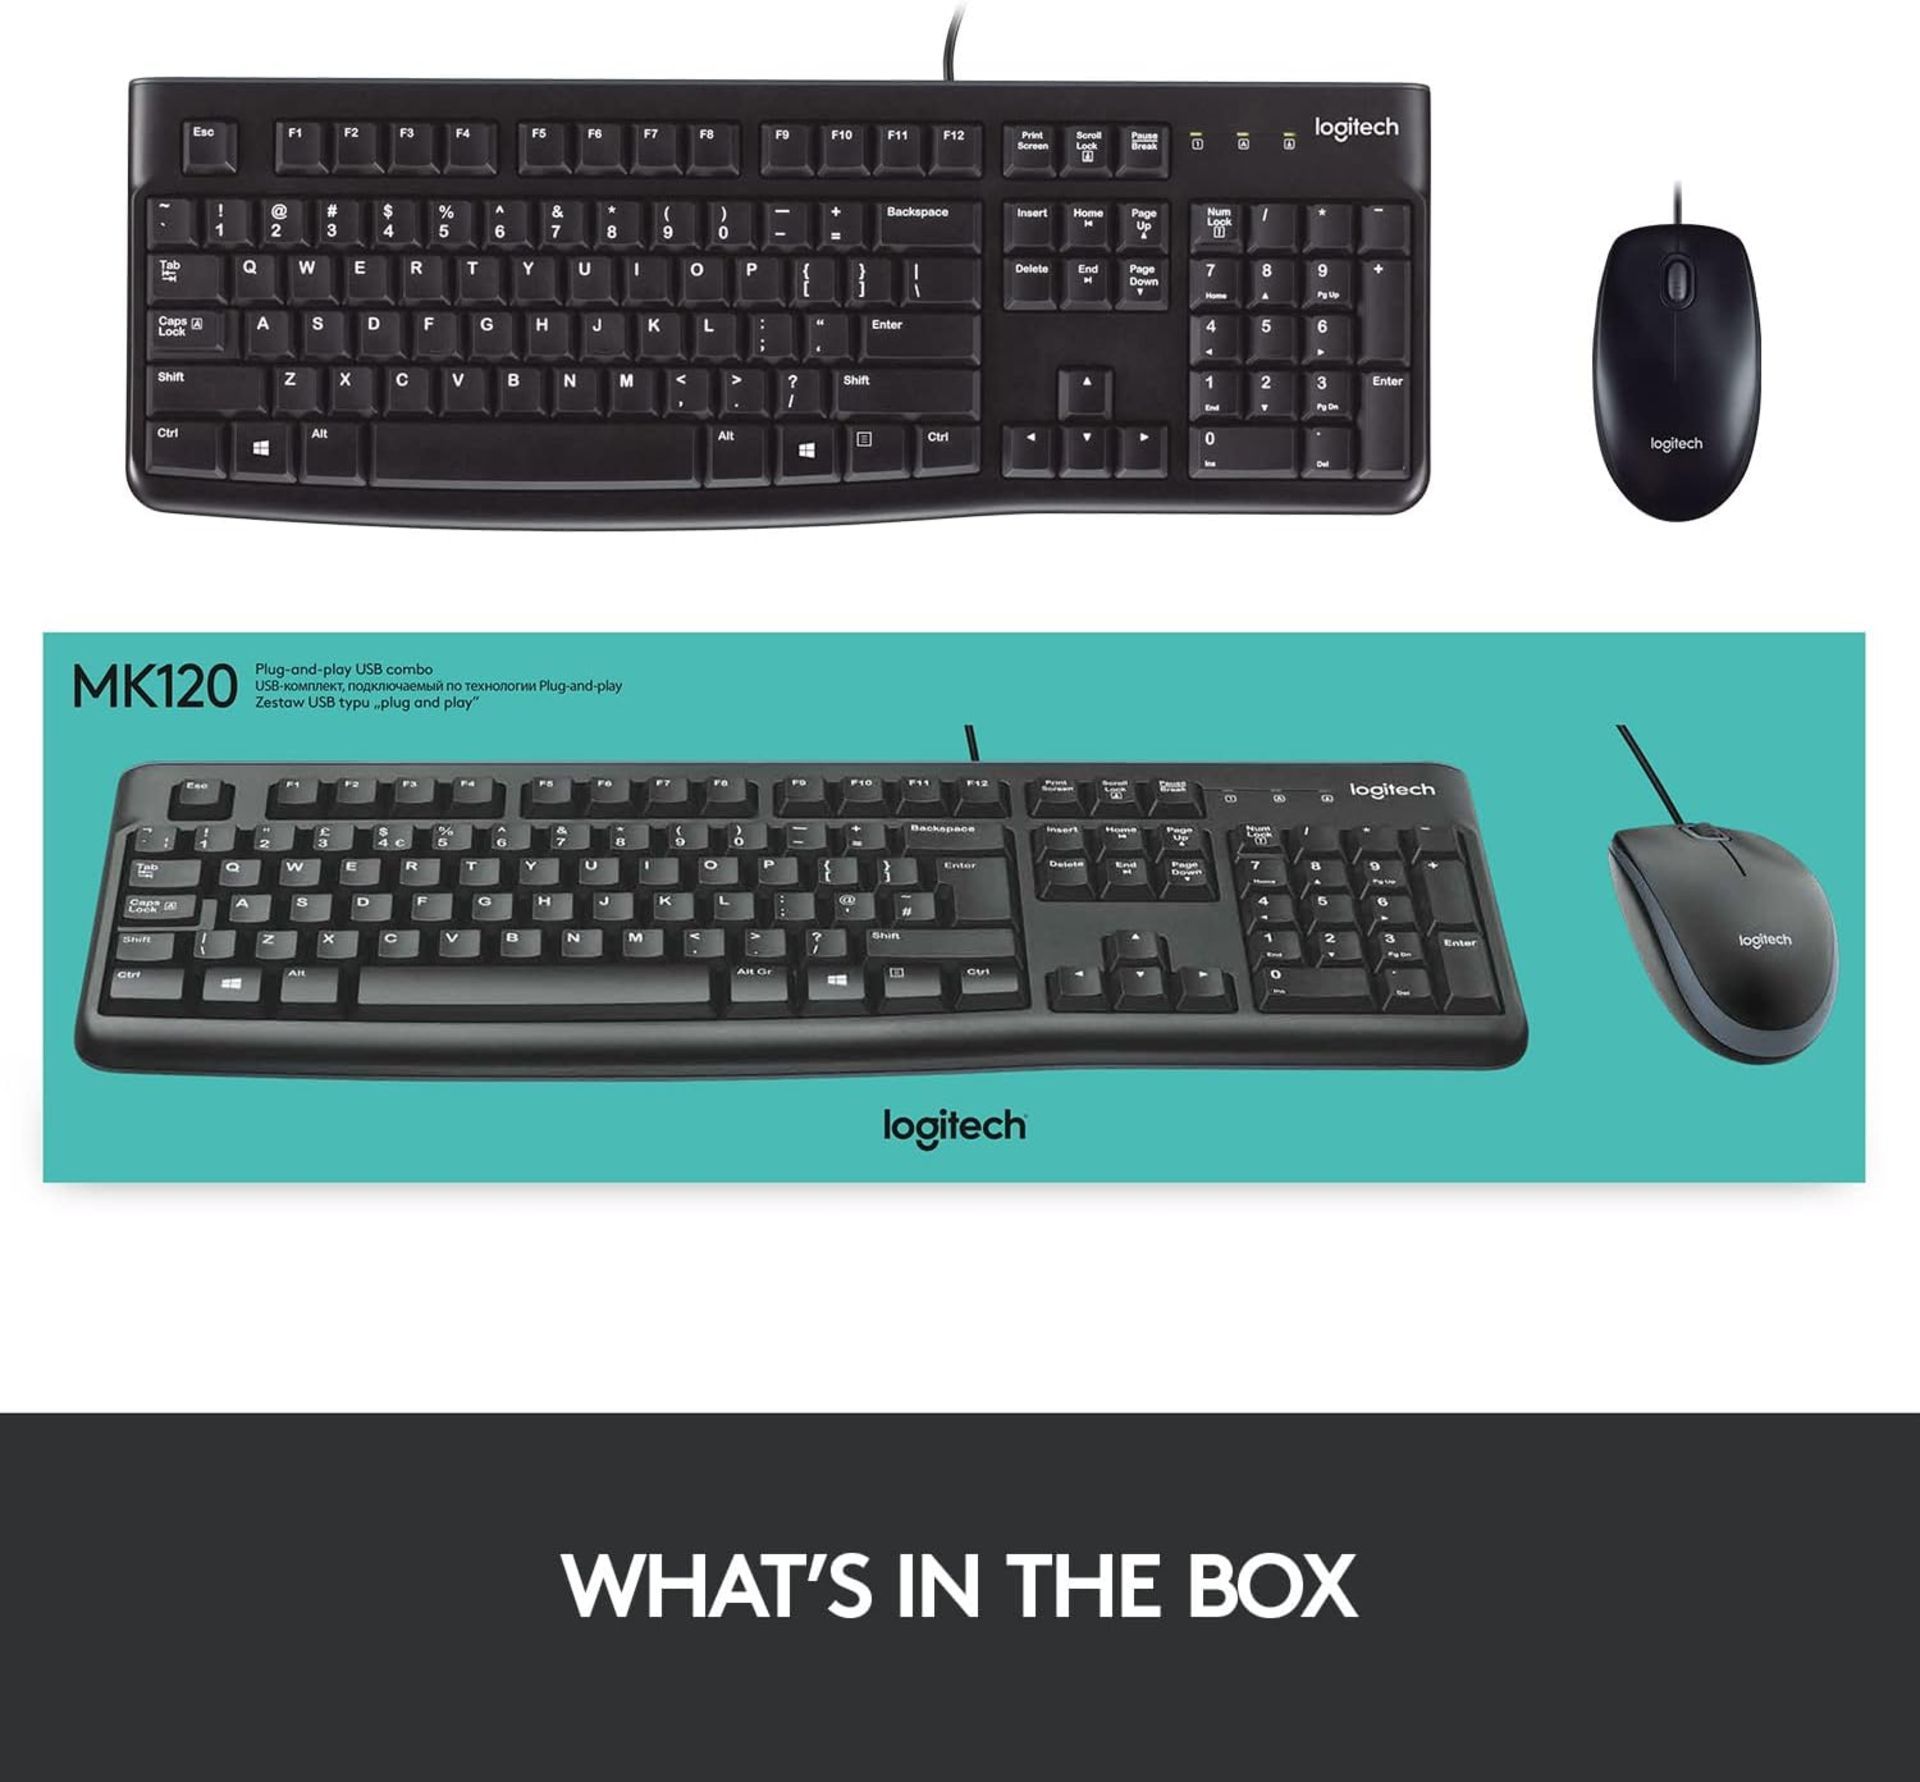 5x BRAND NEW FACTORY SEALED LOGITECH MK120 Wired Keyboard and Mouse Combo for Windows. RRP £24.99 - Image 8 of 8